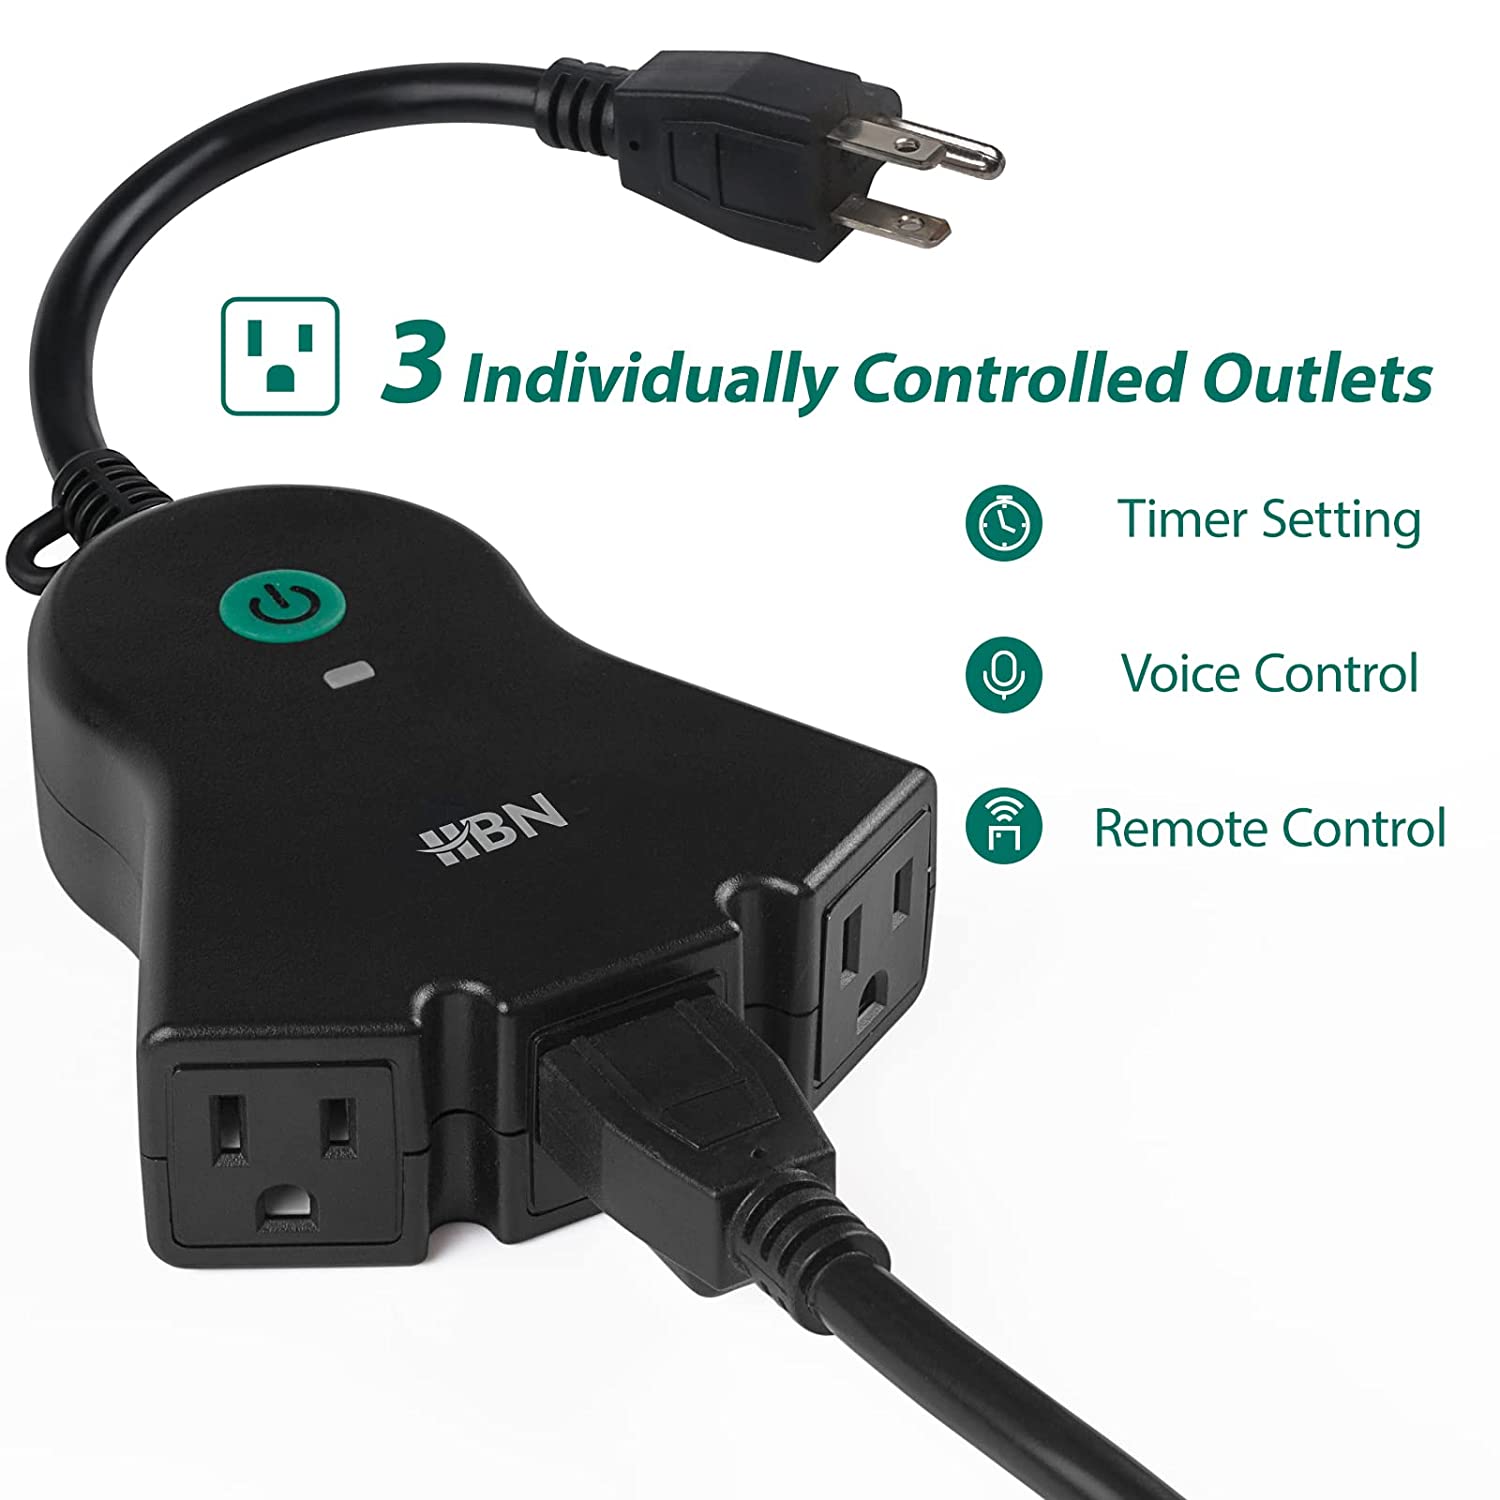 Braumm Smart WiFi Outdoor Outlet review: This undercooked outlet